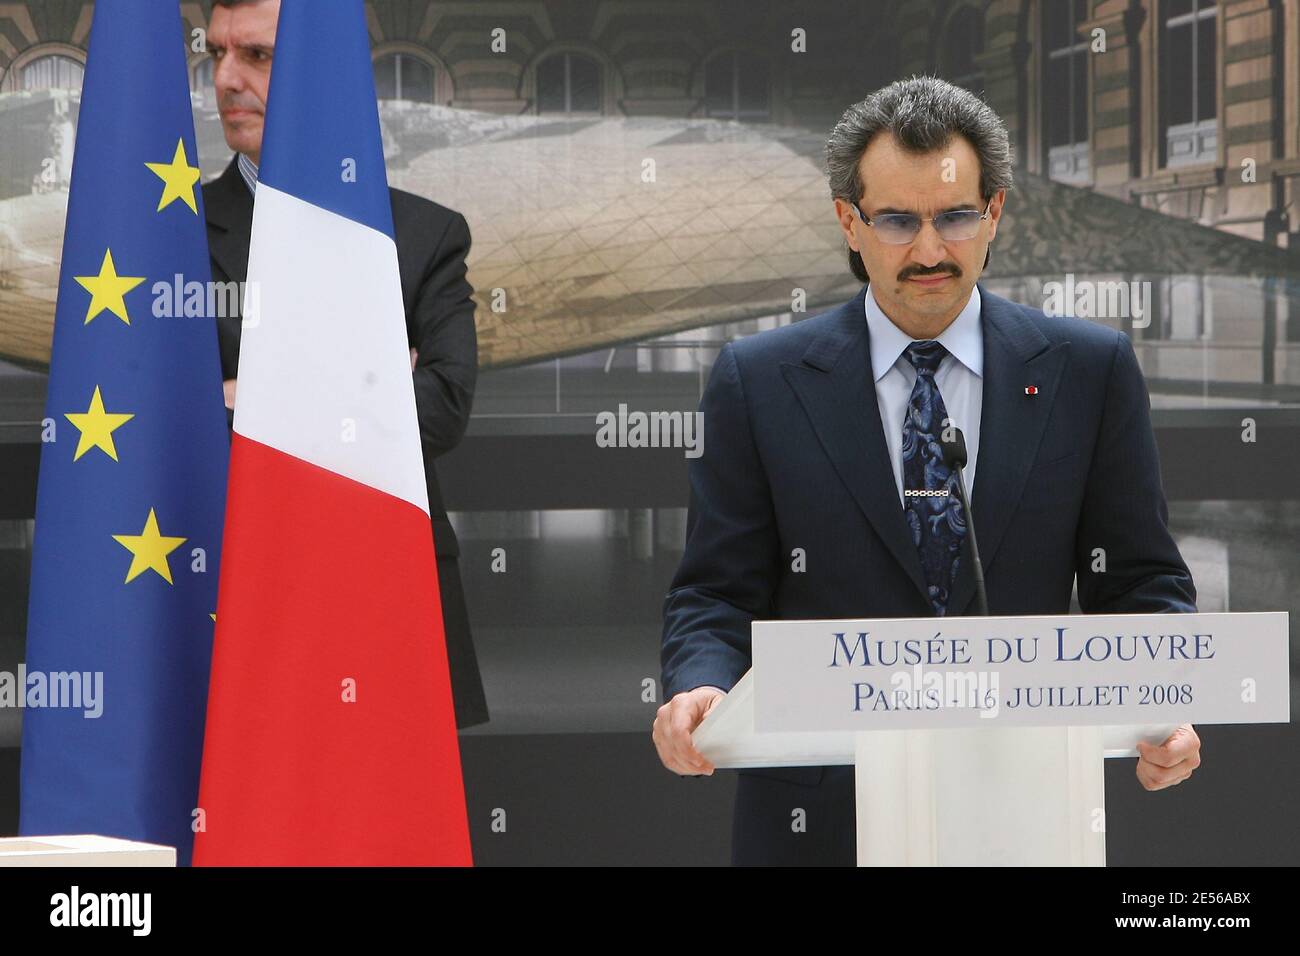 Saudi Arabian Prince Alwaleed bin Talal Bin Abdul aziz Al Saud delivers a speech at Louvre museum's in Paris, France, on July 16, 2008 during the ceremony marking the launch of the works. Photo by Pierre Villard/Pool/ABACAPRESS.COM Stock Photo